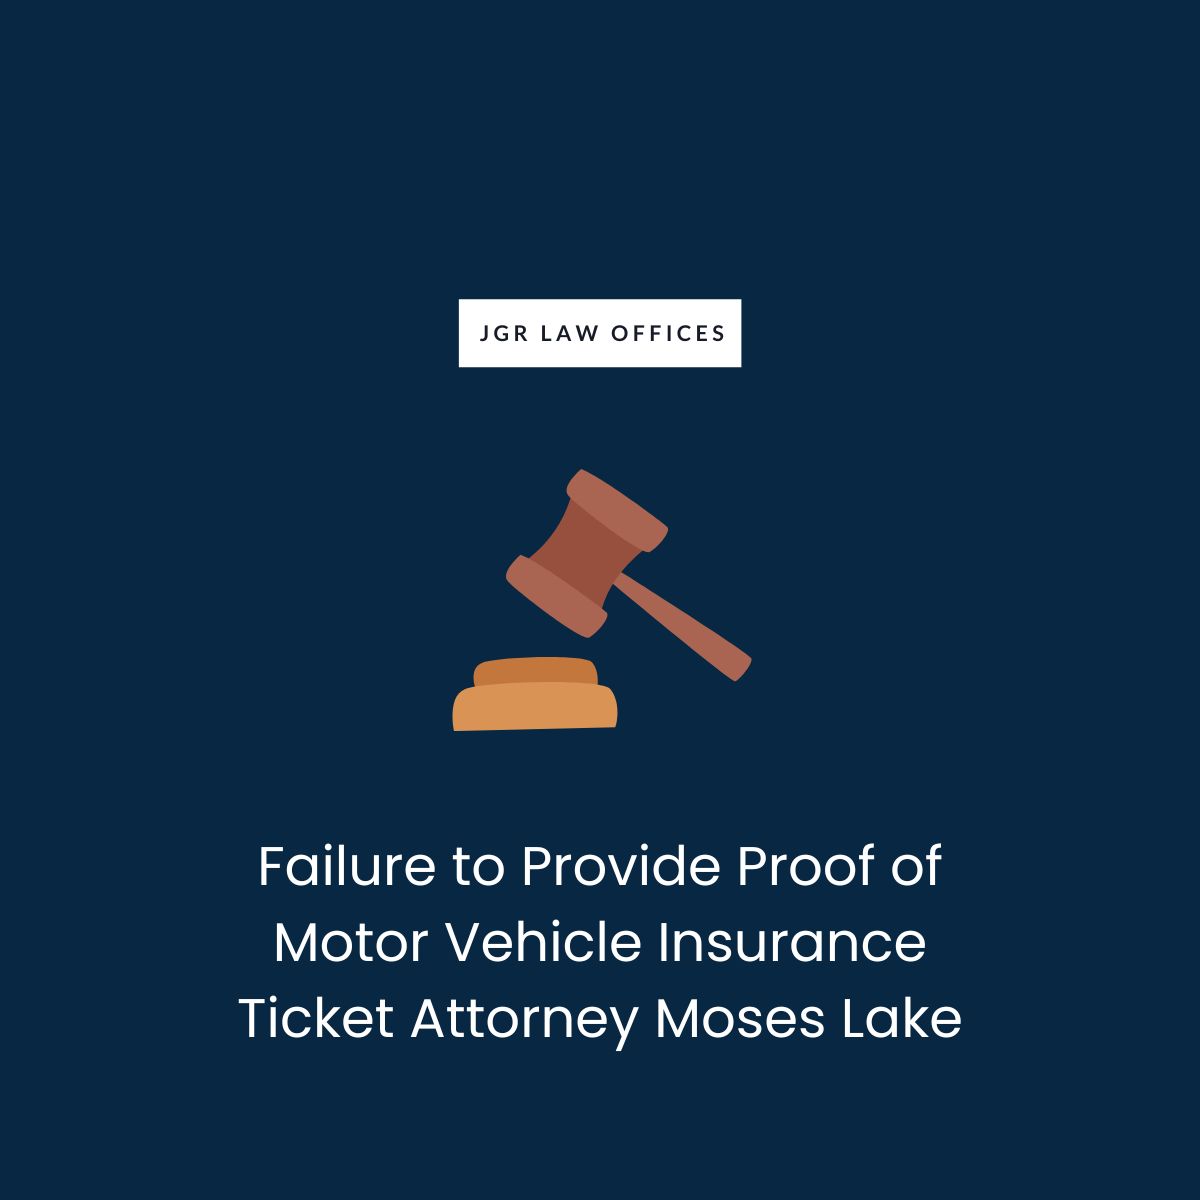 Failure to Provide Proof of Motor Vehicle Insurance Ticket Attorney Moses Lake